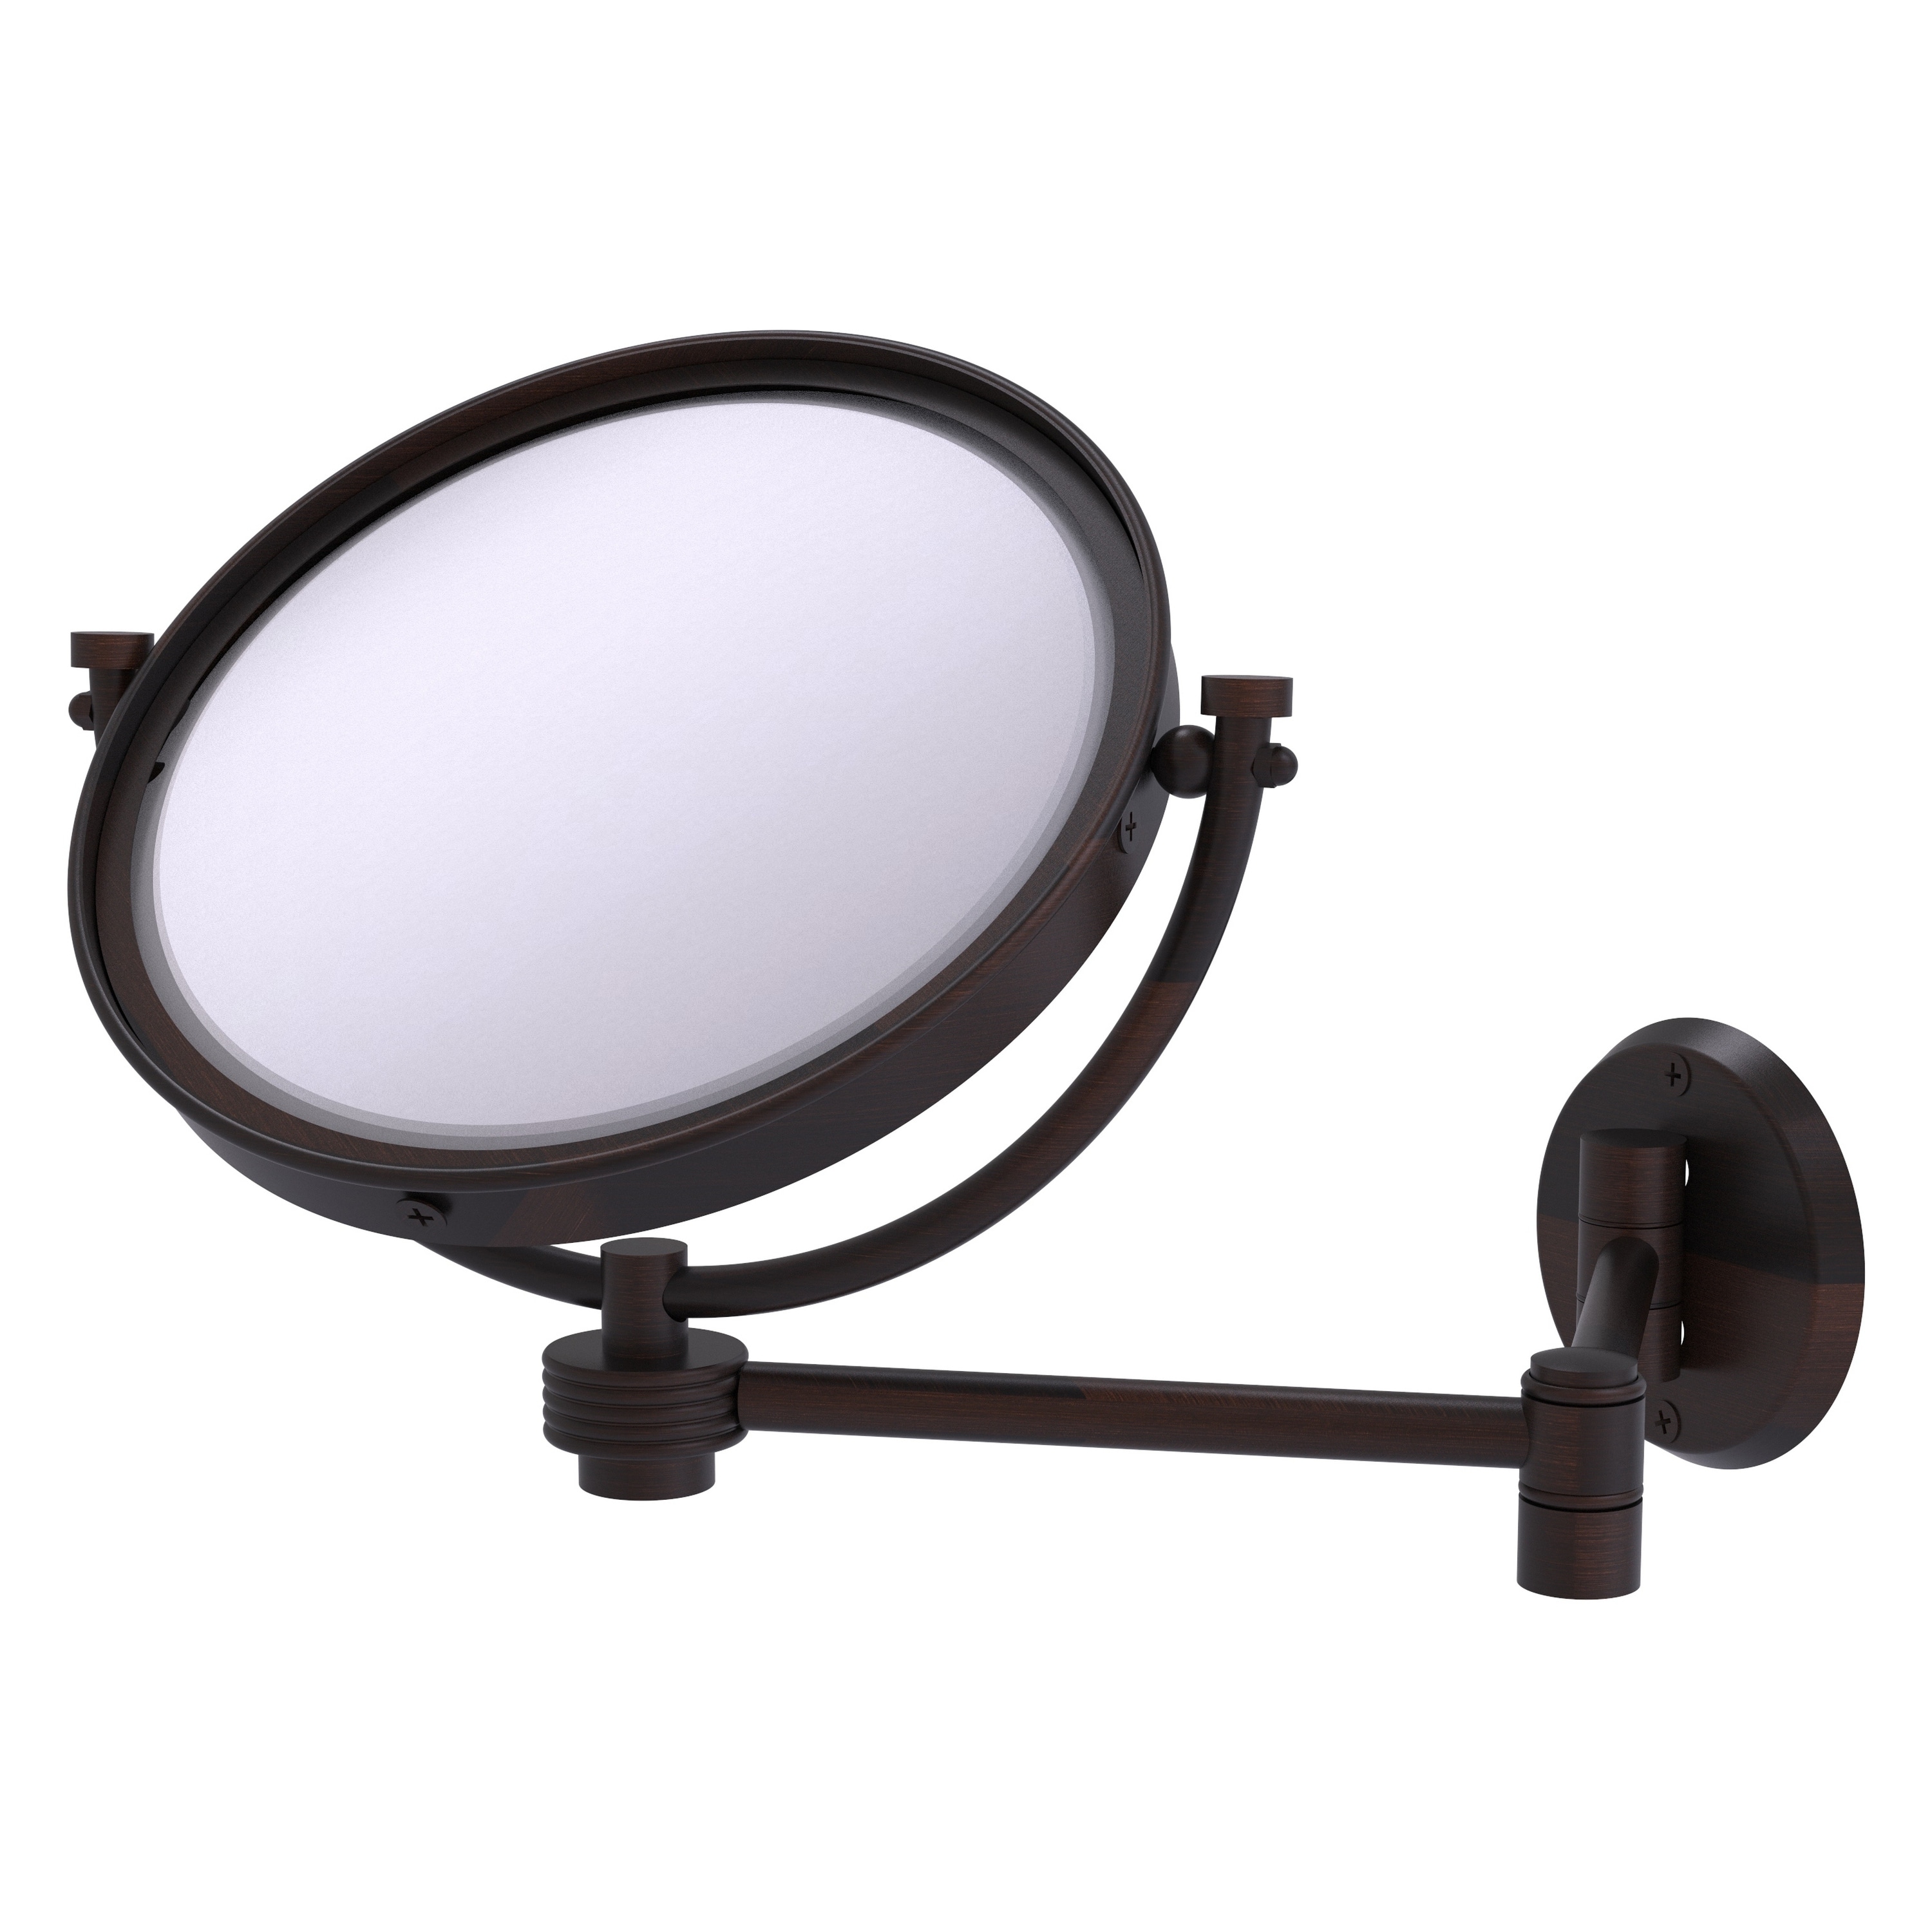 8-in x 10-in Distressed White Double-sided 5X Magnifying Wall-mounted Vanity Mirror | - Allied Brass WM-6G/4X-VB